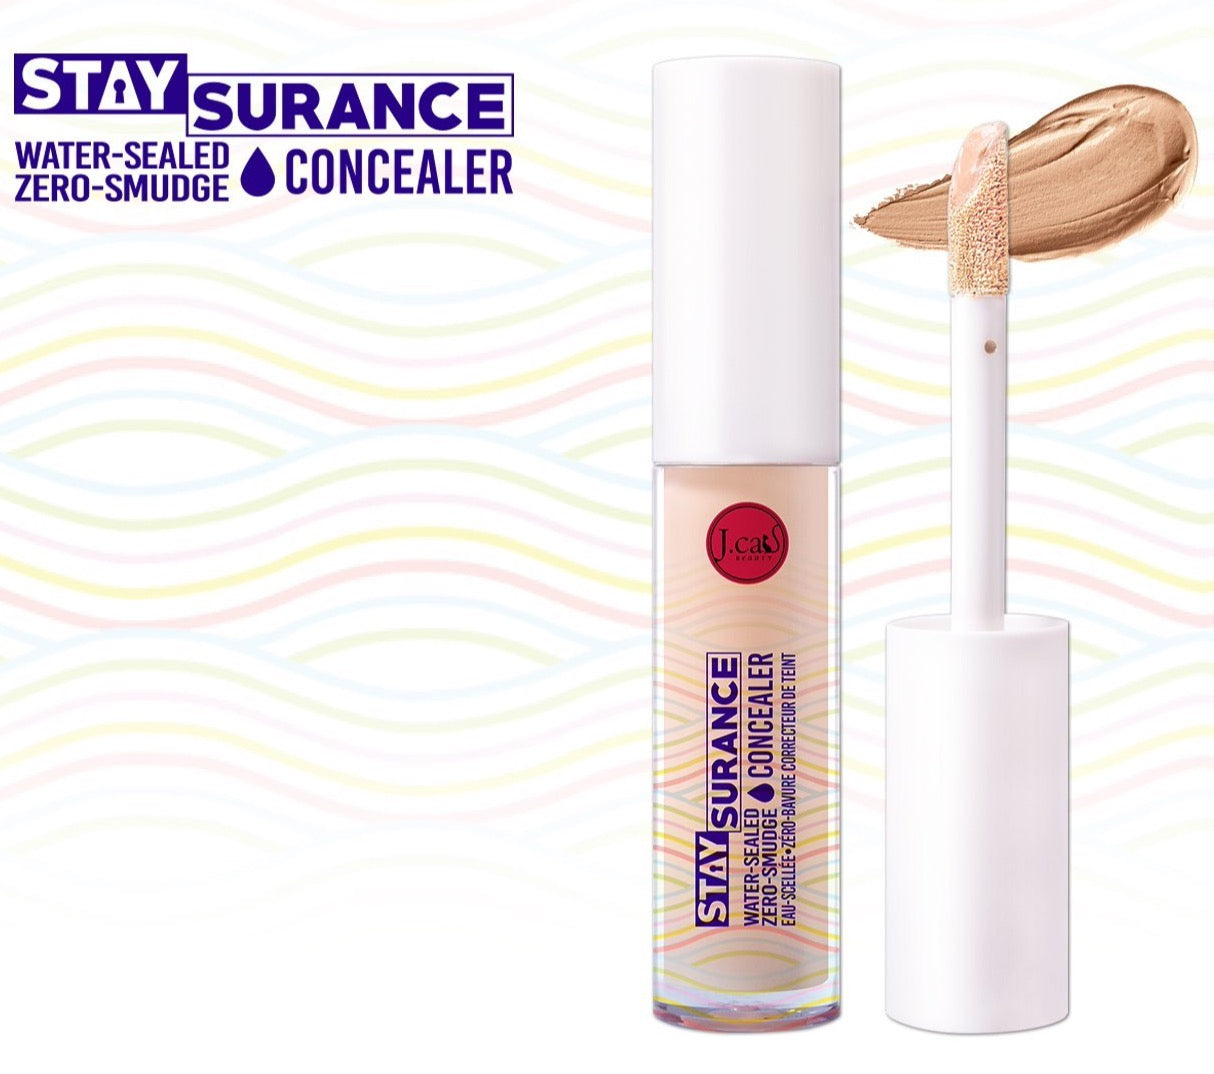 J Cat STAYSURANCE Water-Sealed / Zero-Smudge Concealer, with swatch